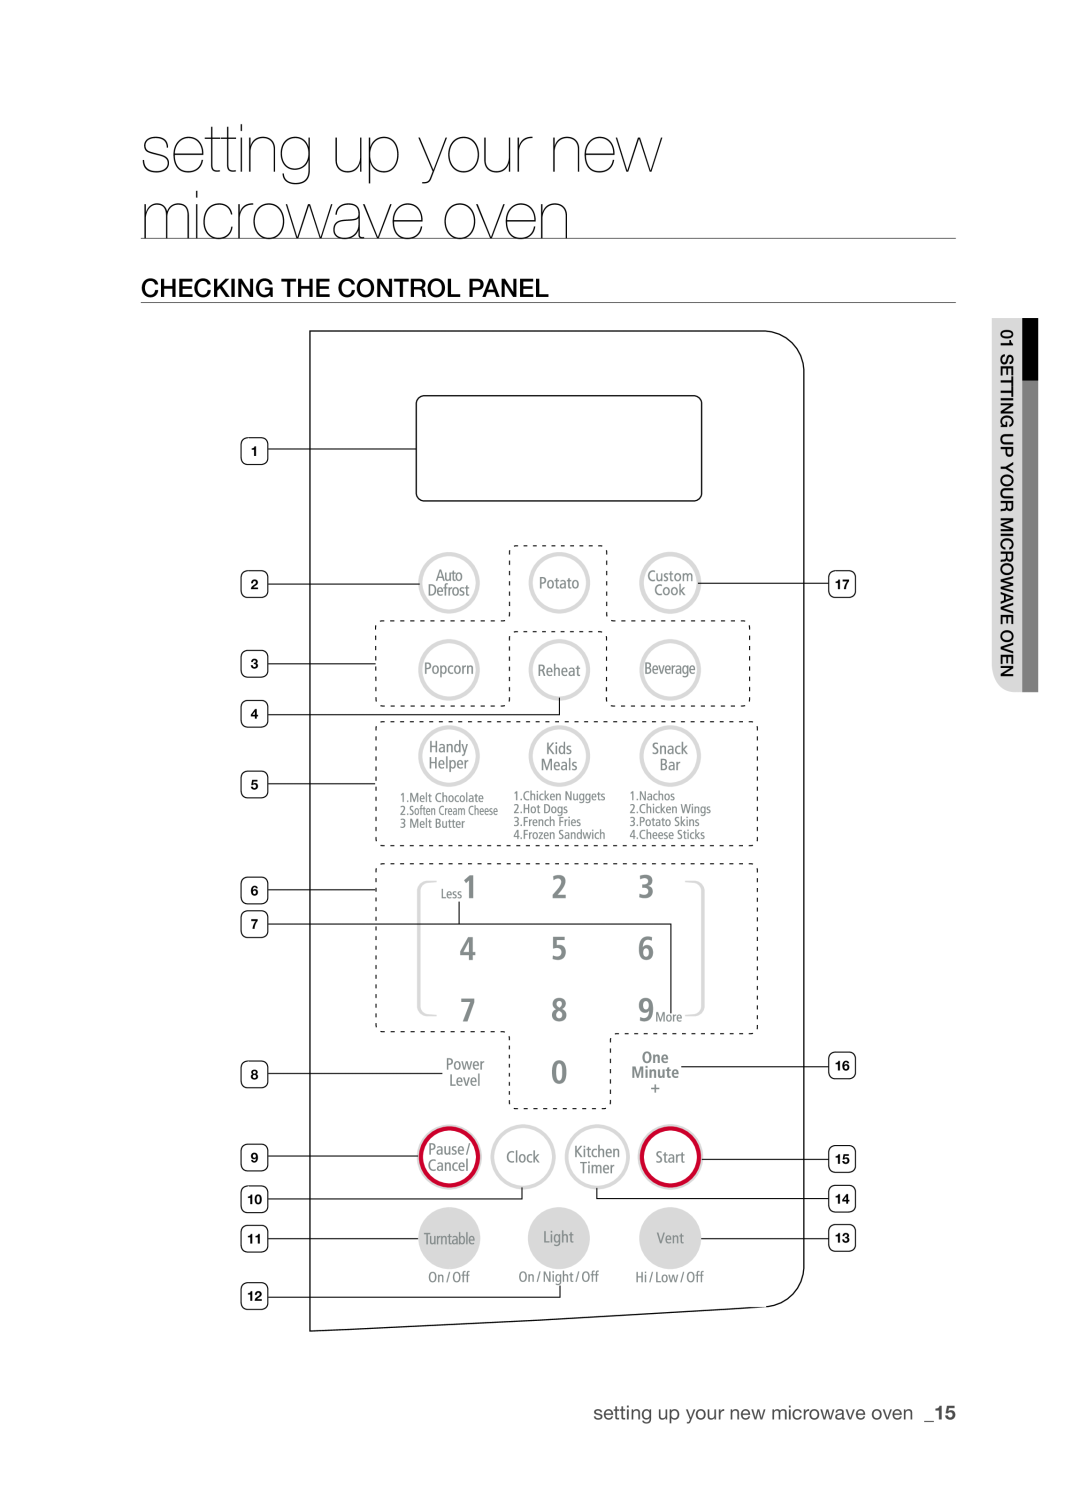 Samsung SMH8165STG user manual Checking the control panel, setting up your new microwave oven 